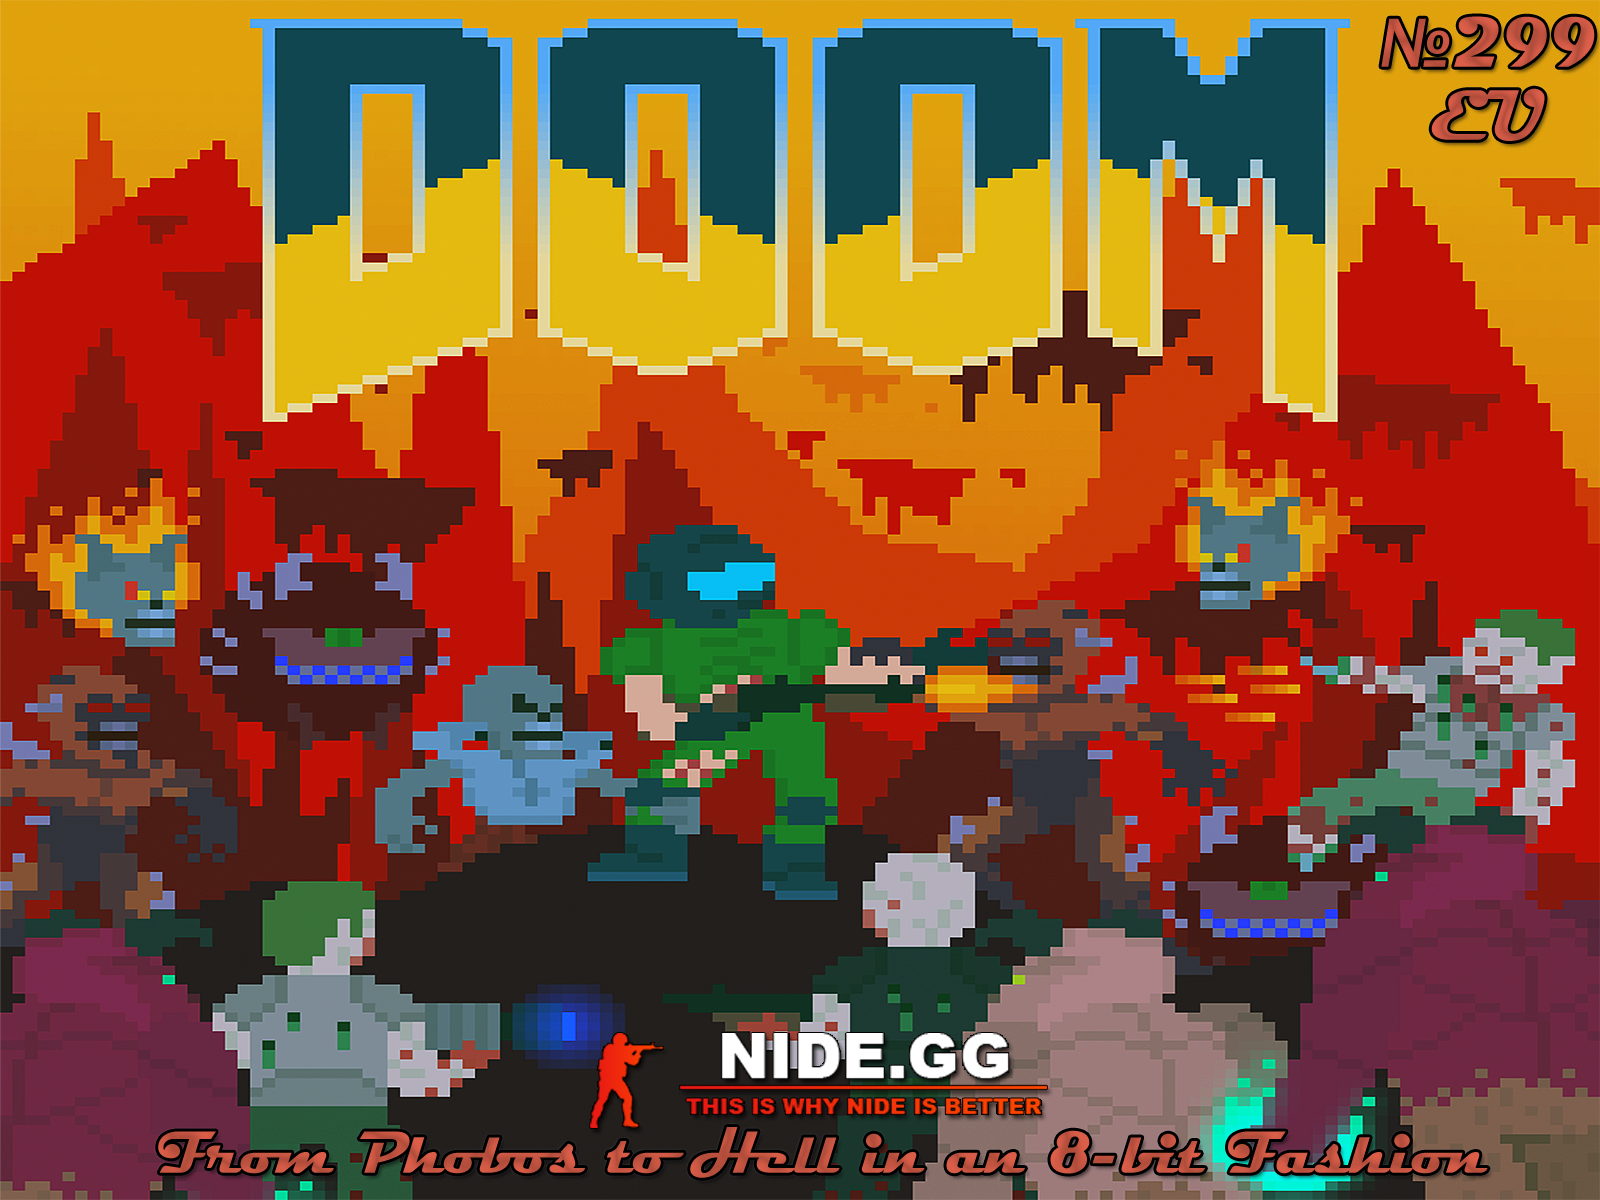 More information about "CSS Zombie Escape Event #299- From Phobos to Hell in an 8-bit Fashion"